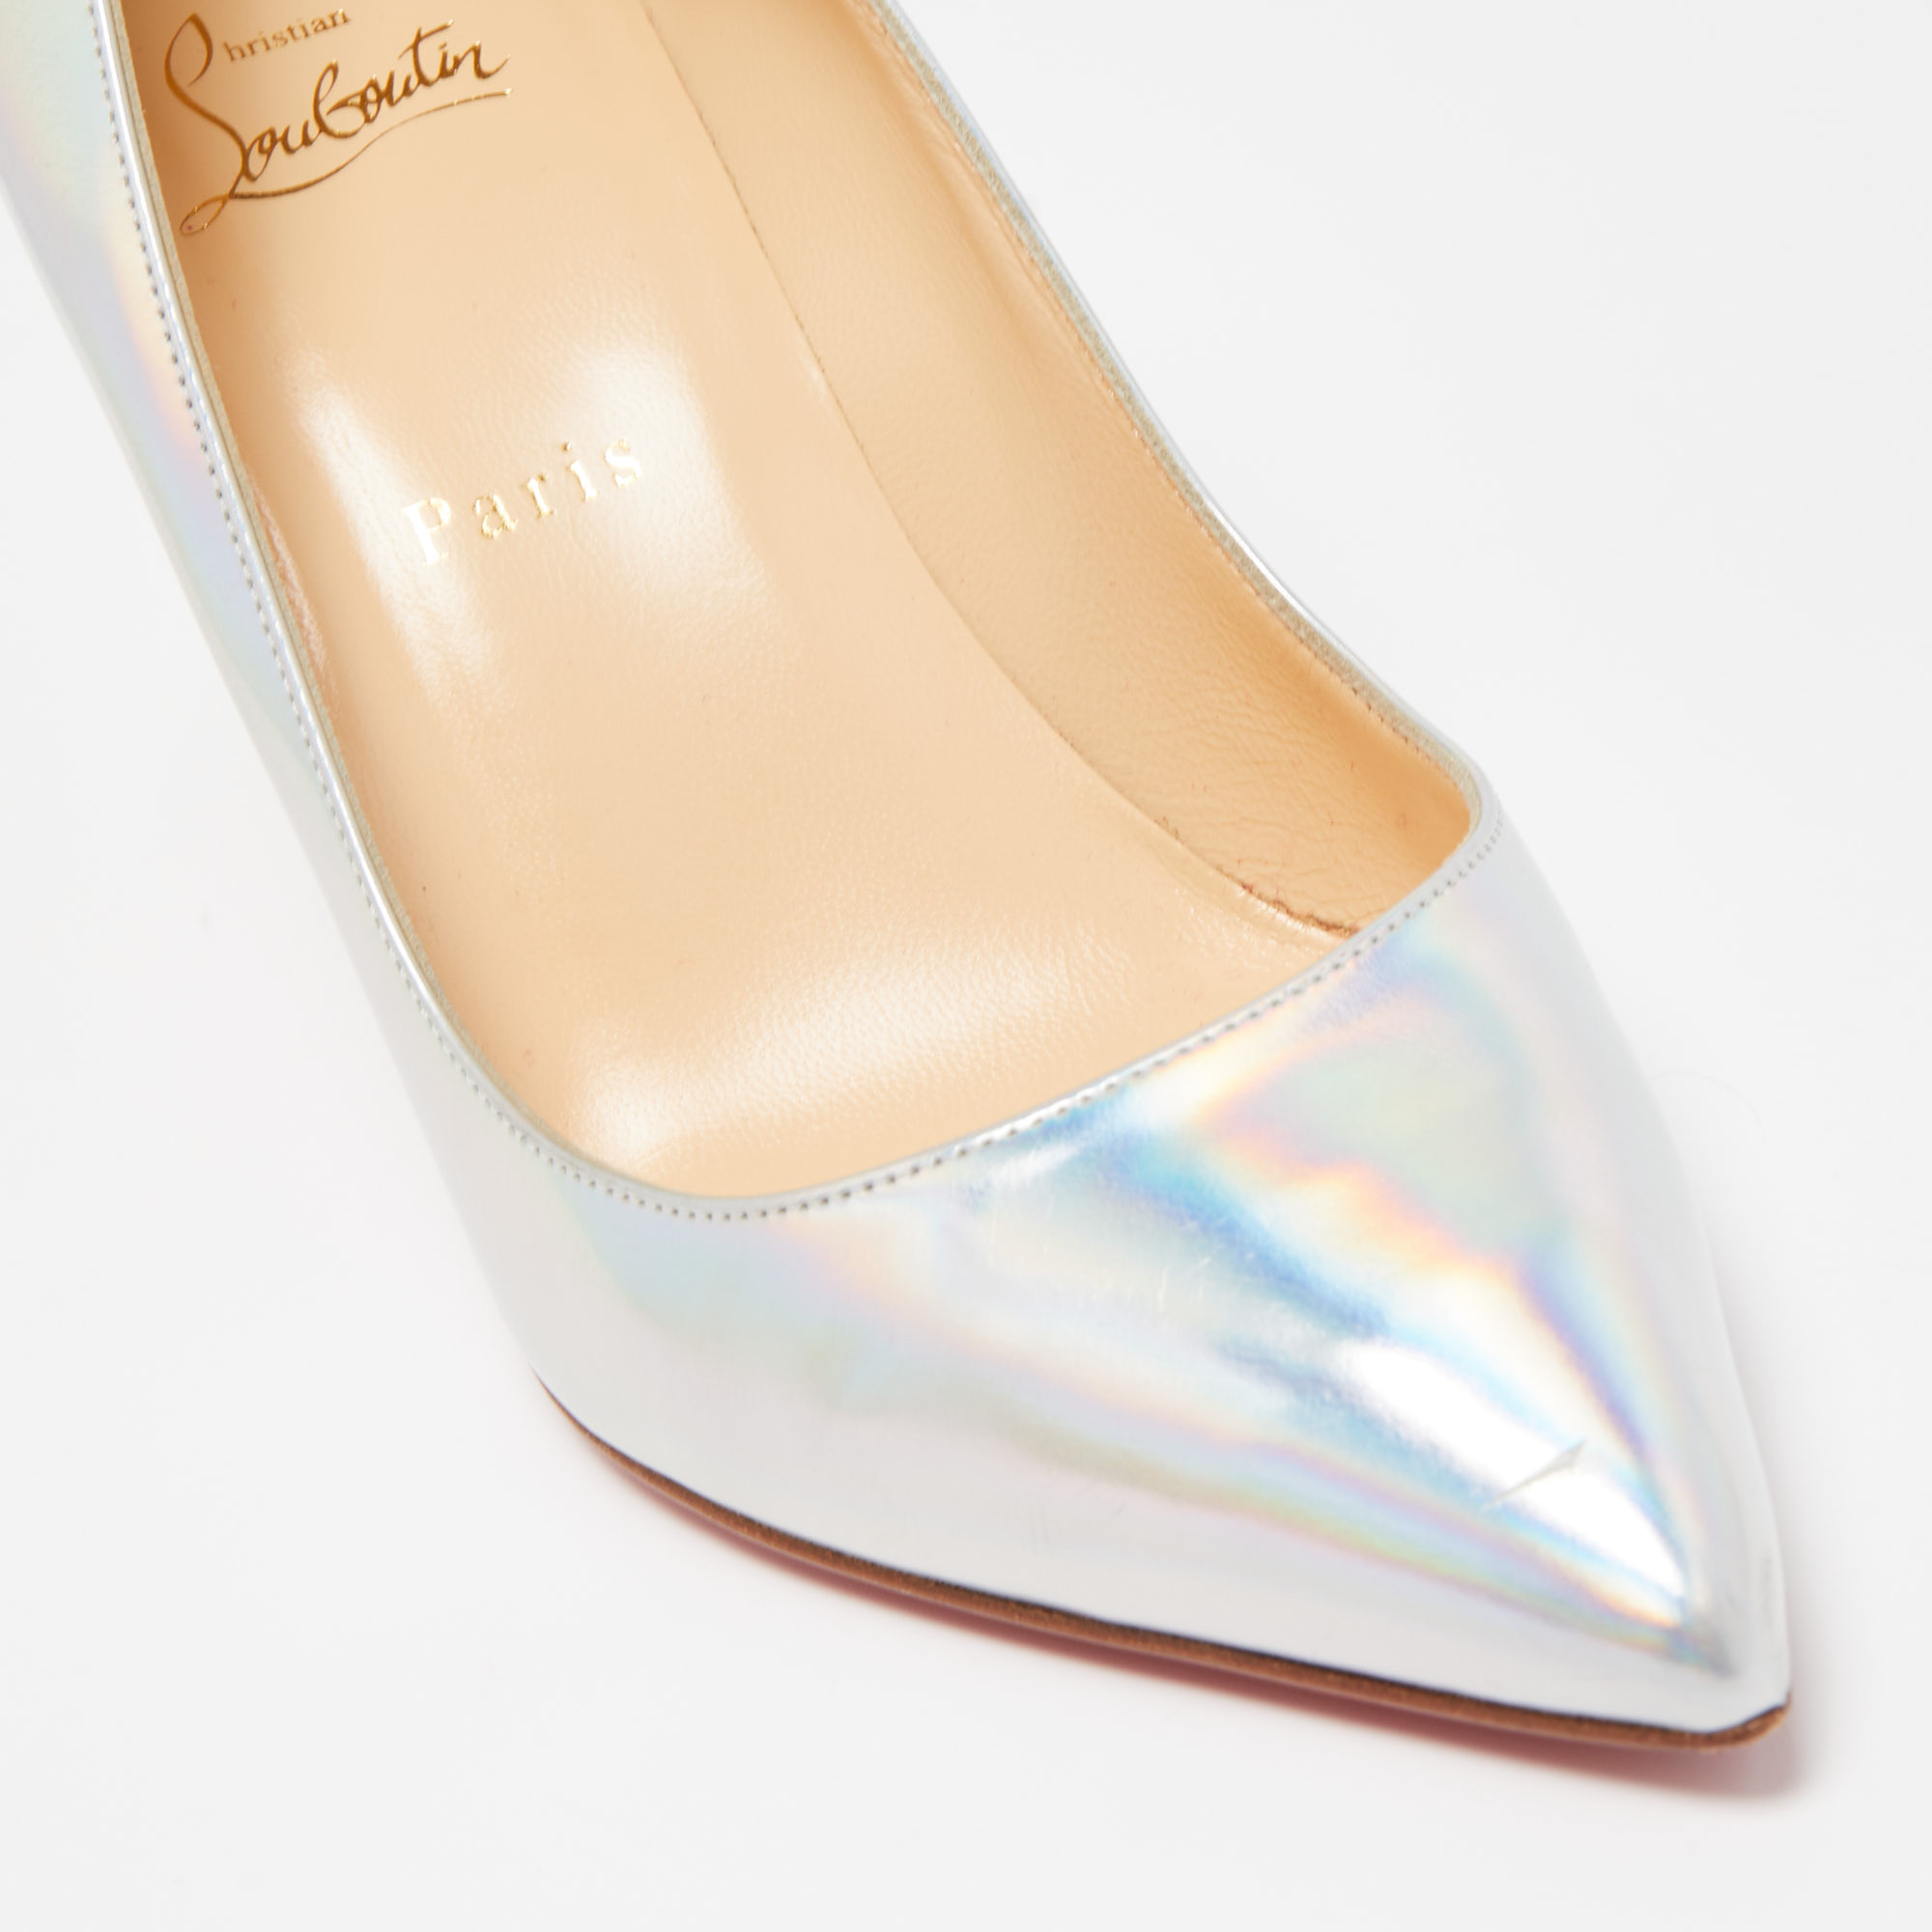 Christian Louboutin Silver Patent Pigalle Pumps Size 38